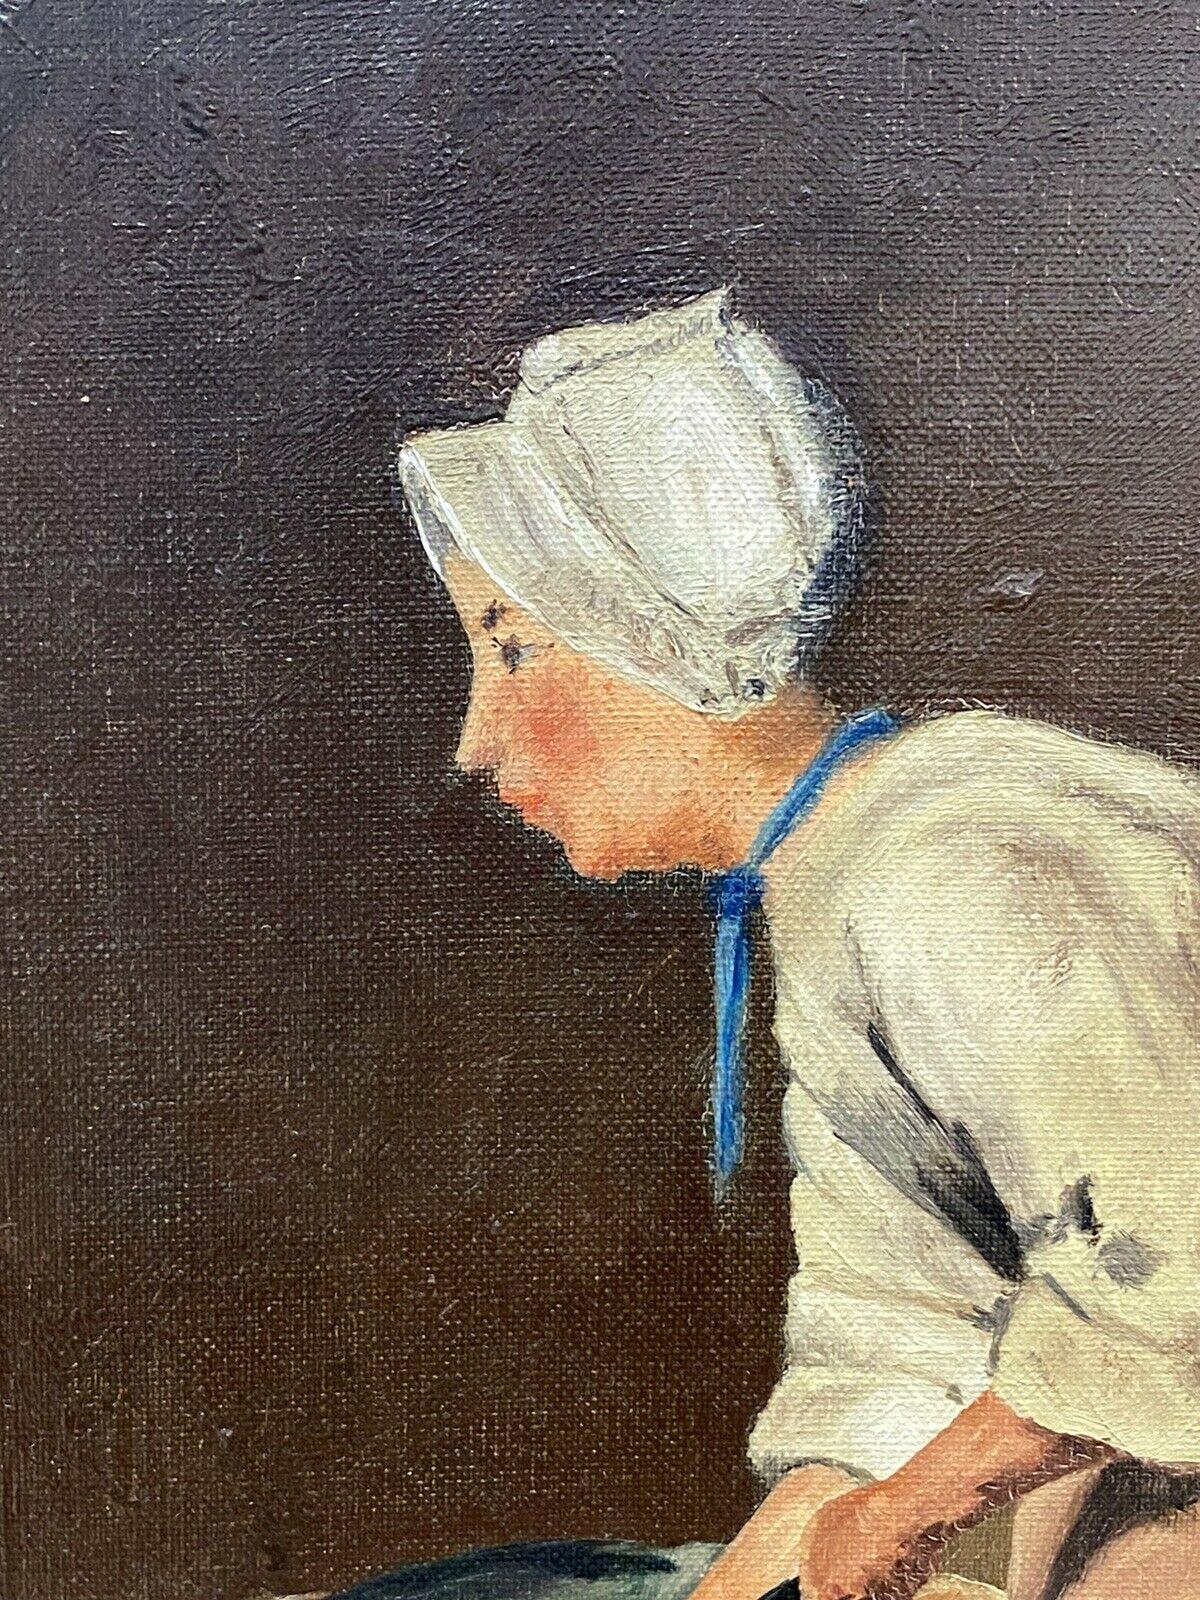 The Kitchen Maid
by Fernand Audet (French, Tarascon 1923- Mulhouse 2016)
signed
oil painting on canvas, unframed

painting: 18 x 15 inches

A fine 